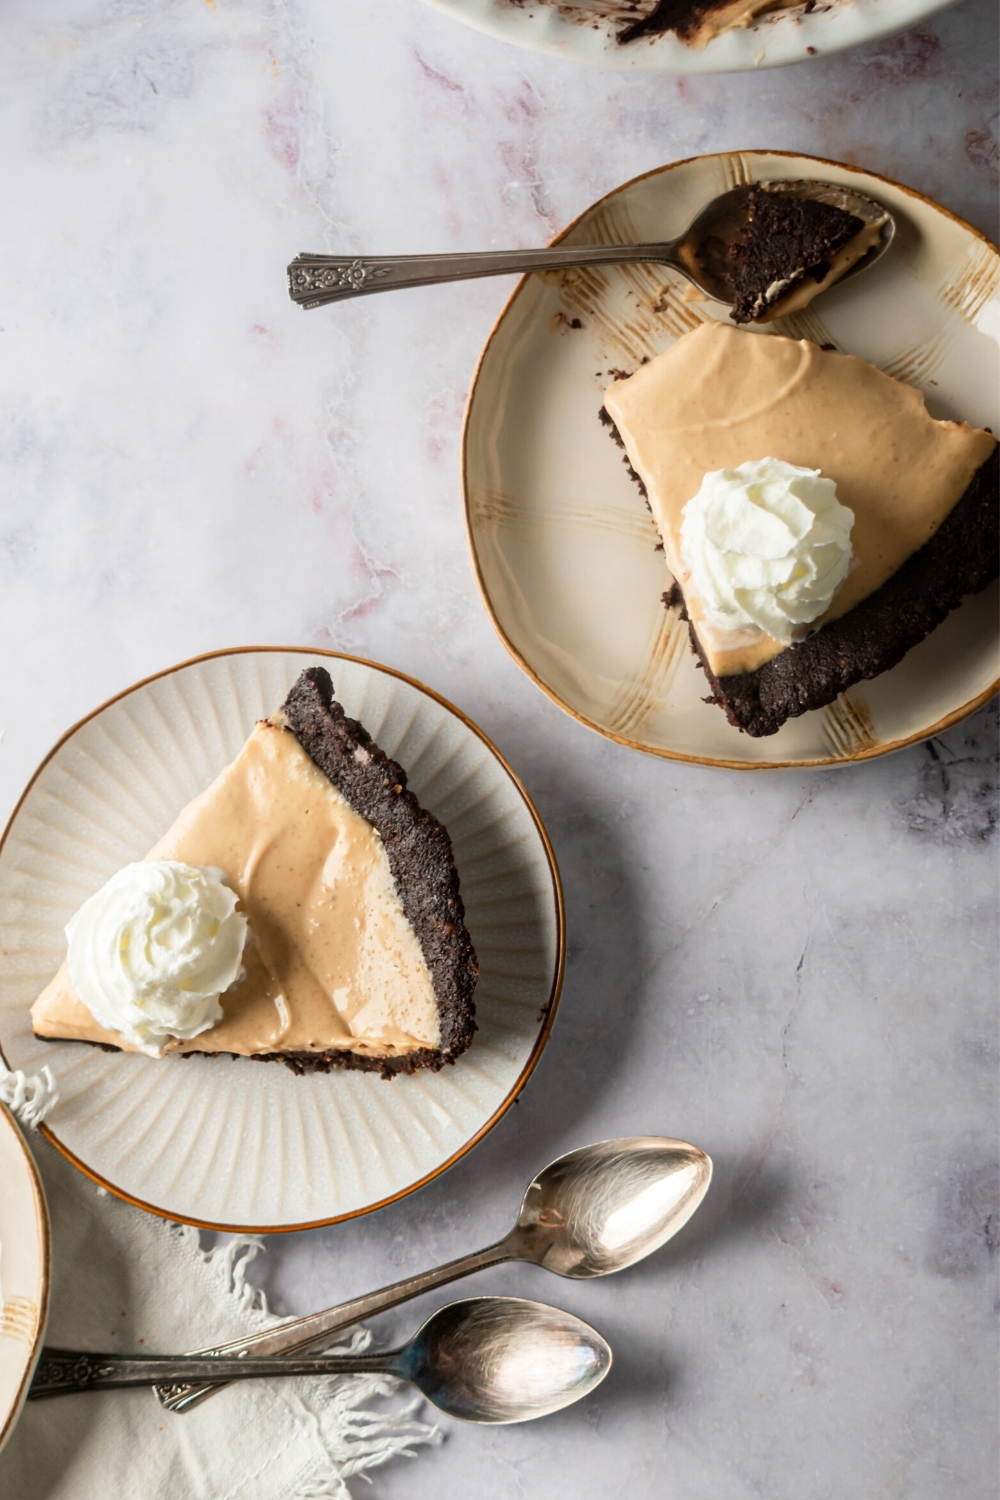 Two plates on a white counter each with a slice of chocolate peanut butter pie on it.